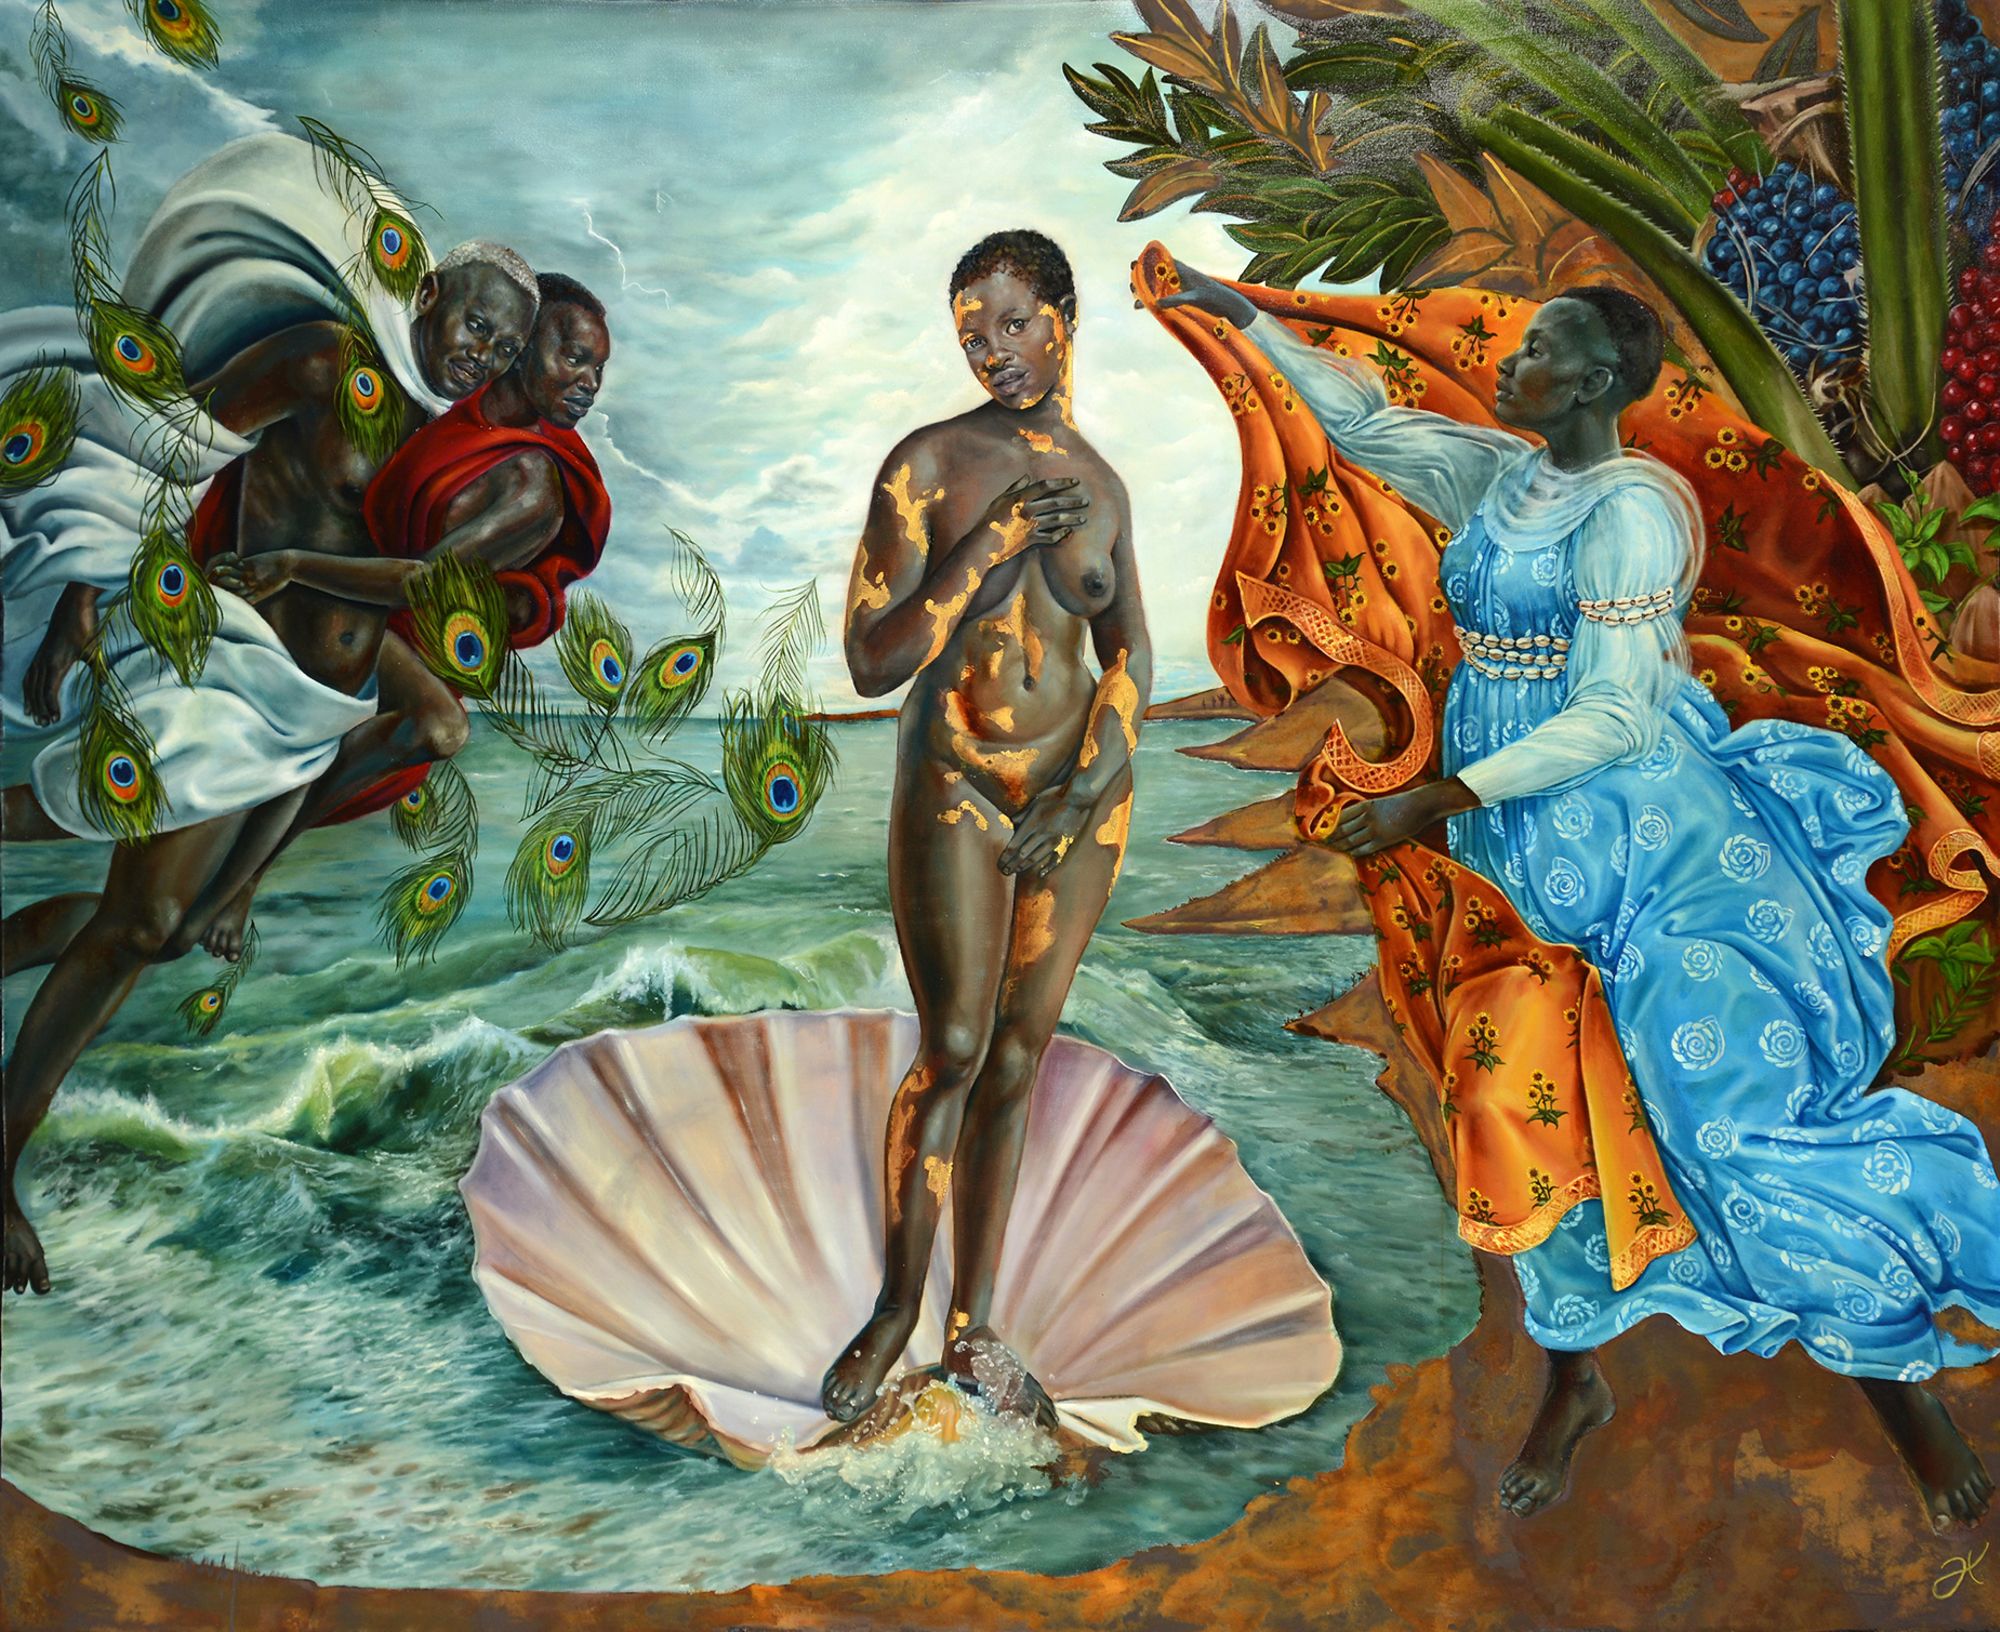 Currently on display at the Spelman College Museum of Fine Art in Atlanta, the exhibit "Harmonia Rosales: Master Narrative" entwines West African religion and art techniques of the Renaissance period. Pictured here: Rosales' work "The Birth of Oshun."